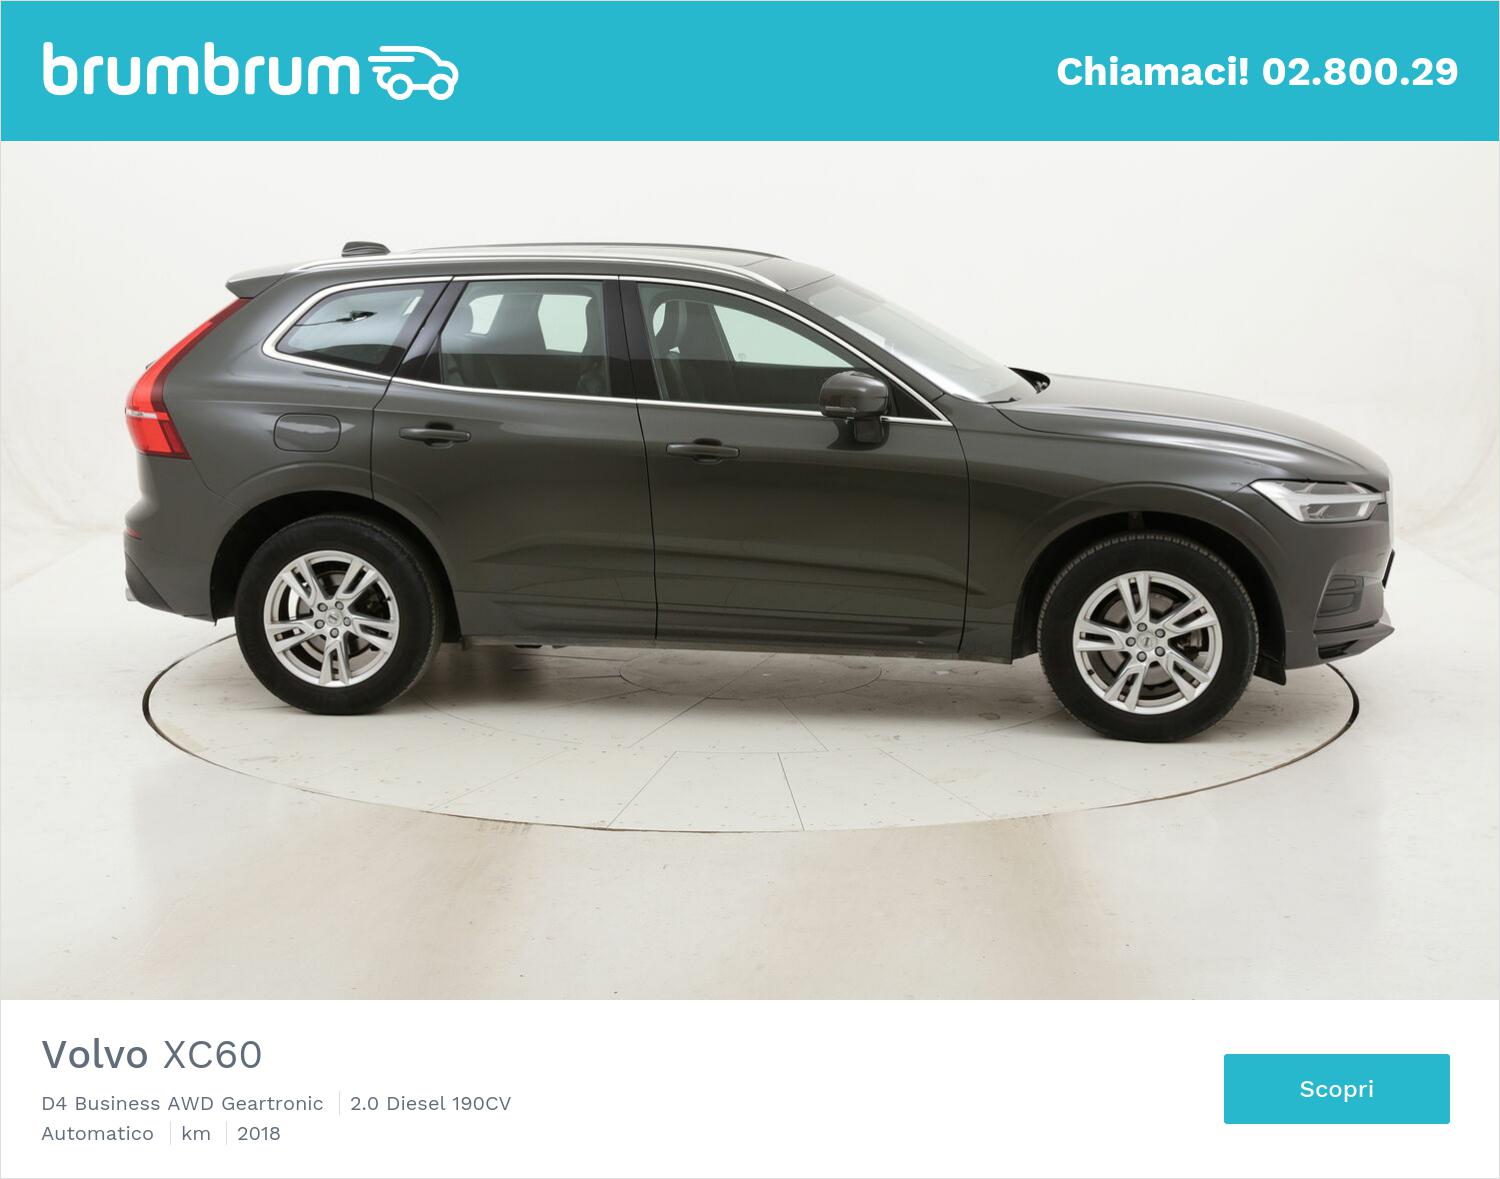 Volvo XC60 D4 Business AWD Geartronic usata del 2018 con 59.652 km | brumbrum